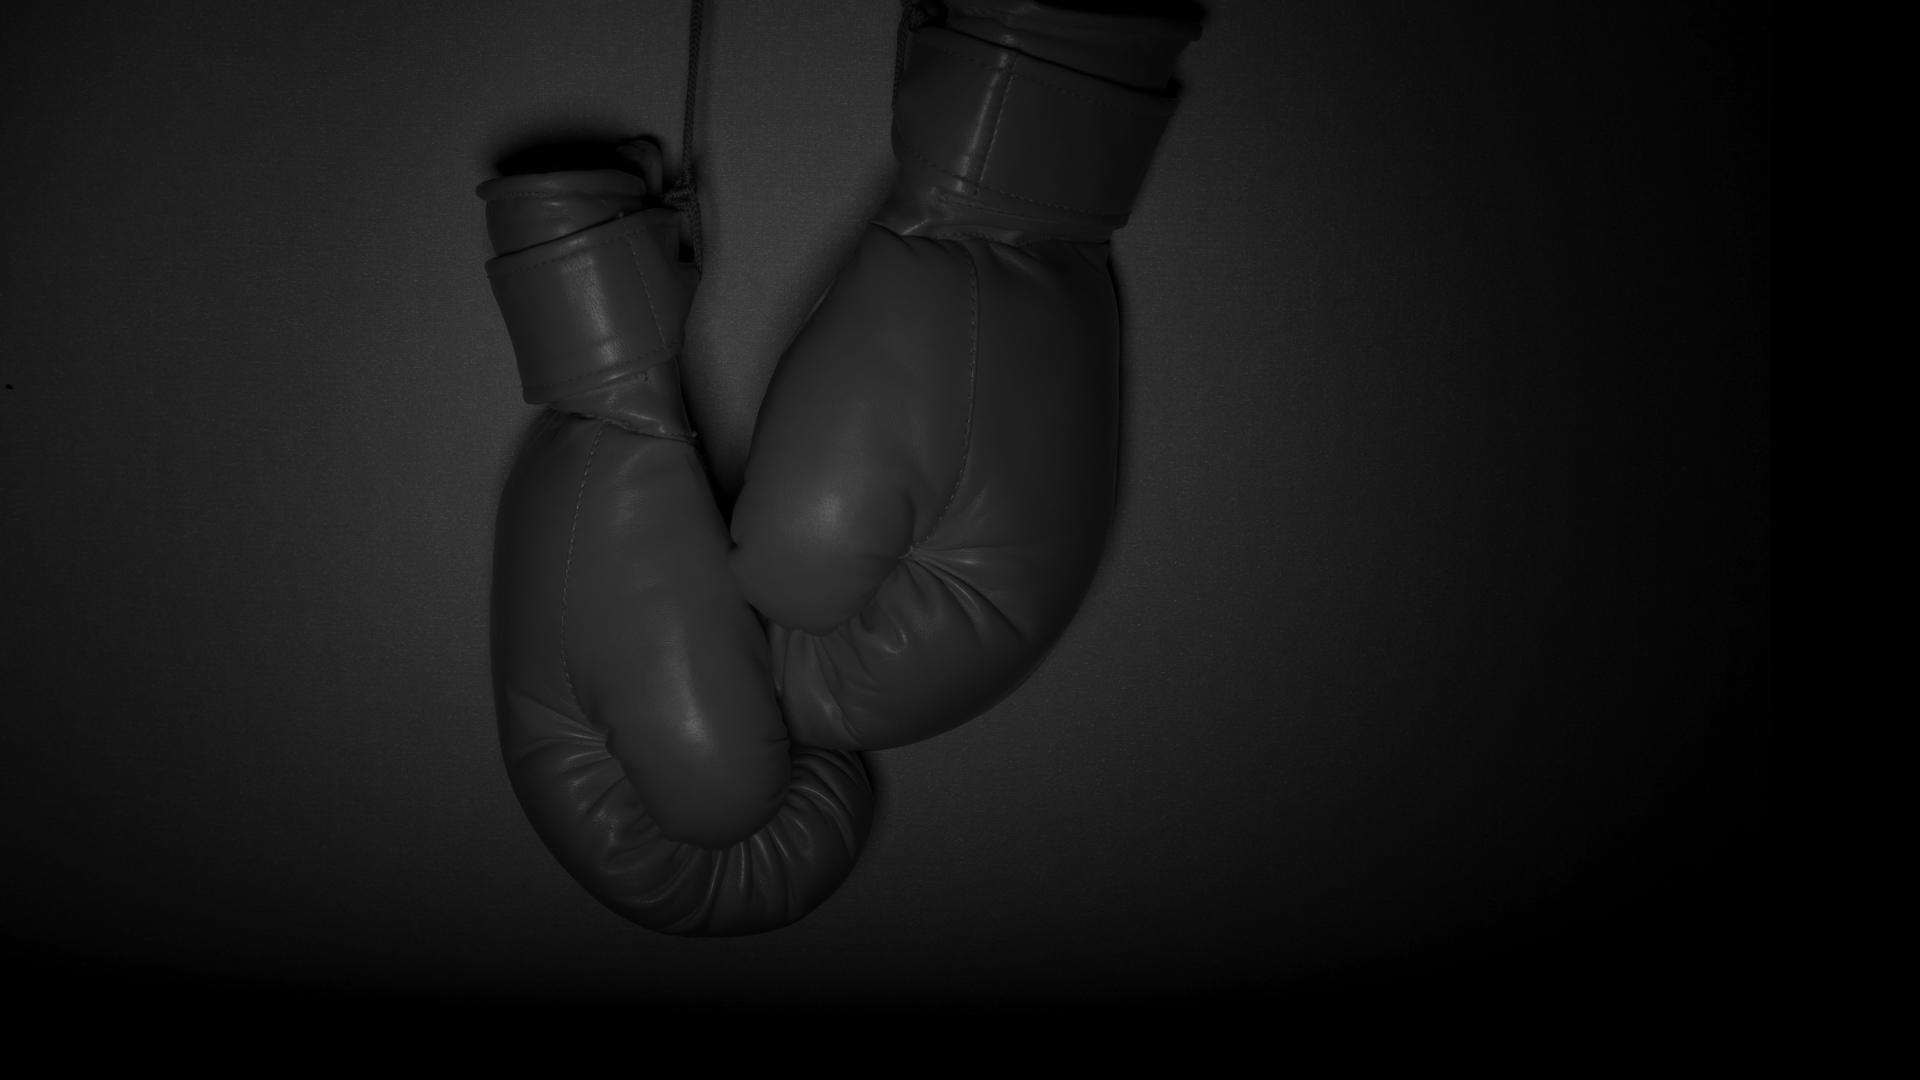 Black and white image of hanging boxing gloves